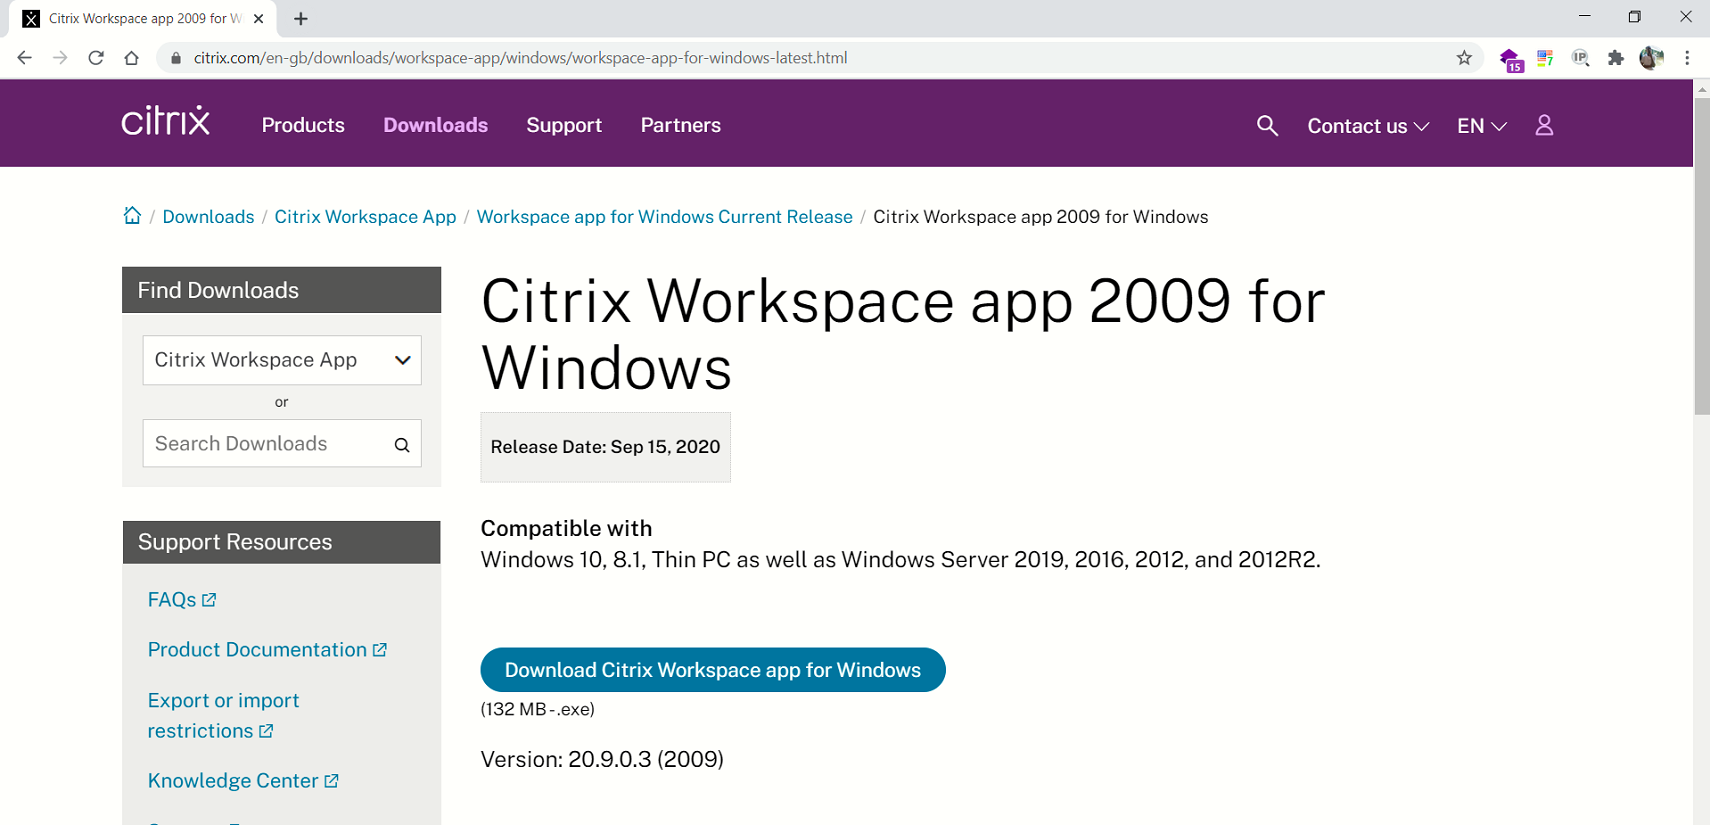 download files to my pc from citrix workspace google chrome version